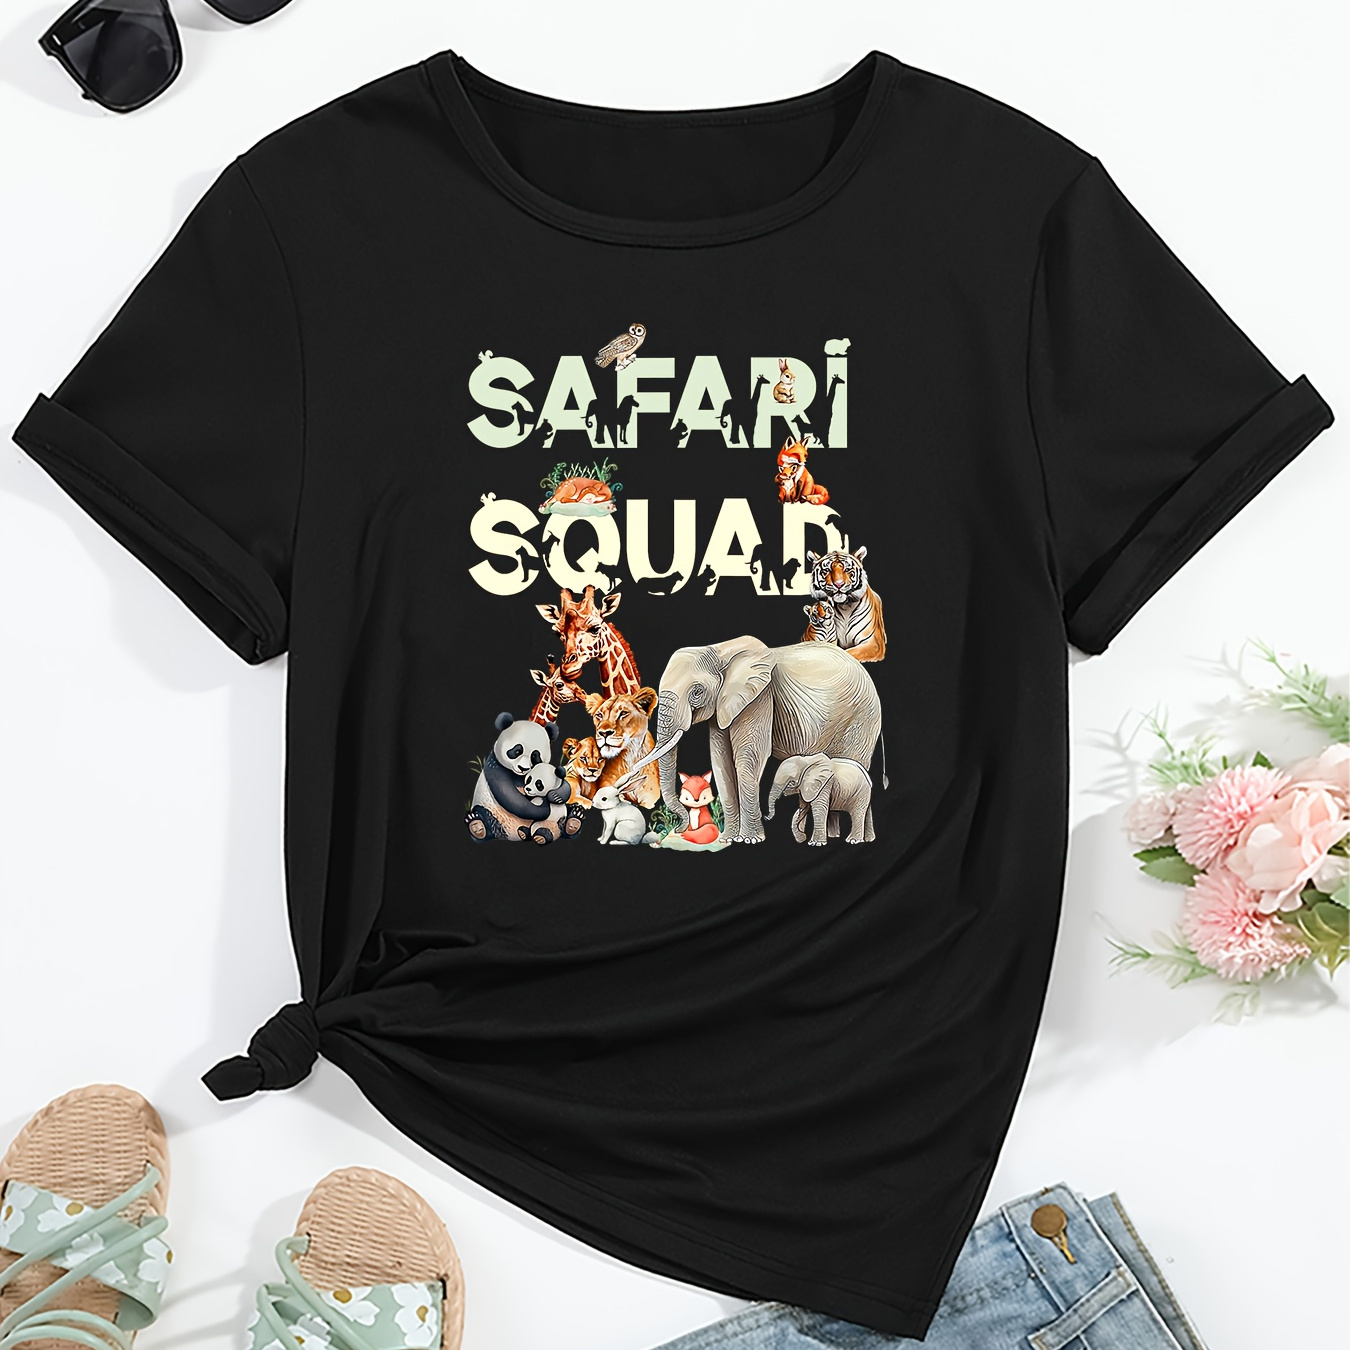 

Women's Graphic Tee, Casual Round Neck Short Sleeve Top, Soft Comfortable Fabric, Casual T-shirt For Animal Lovers